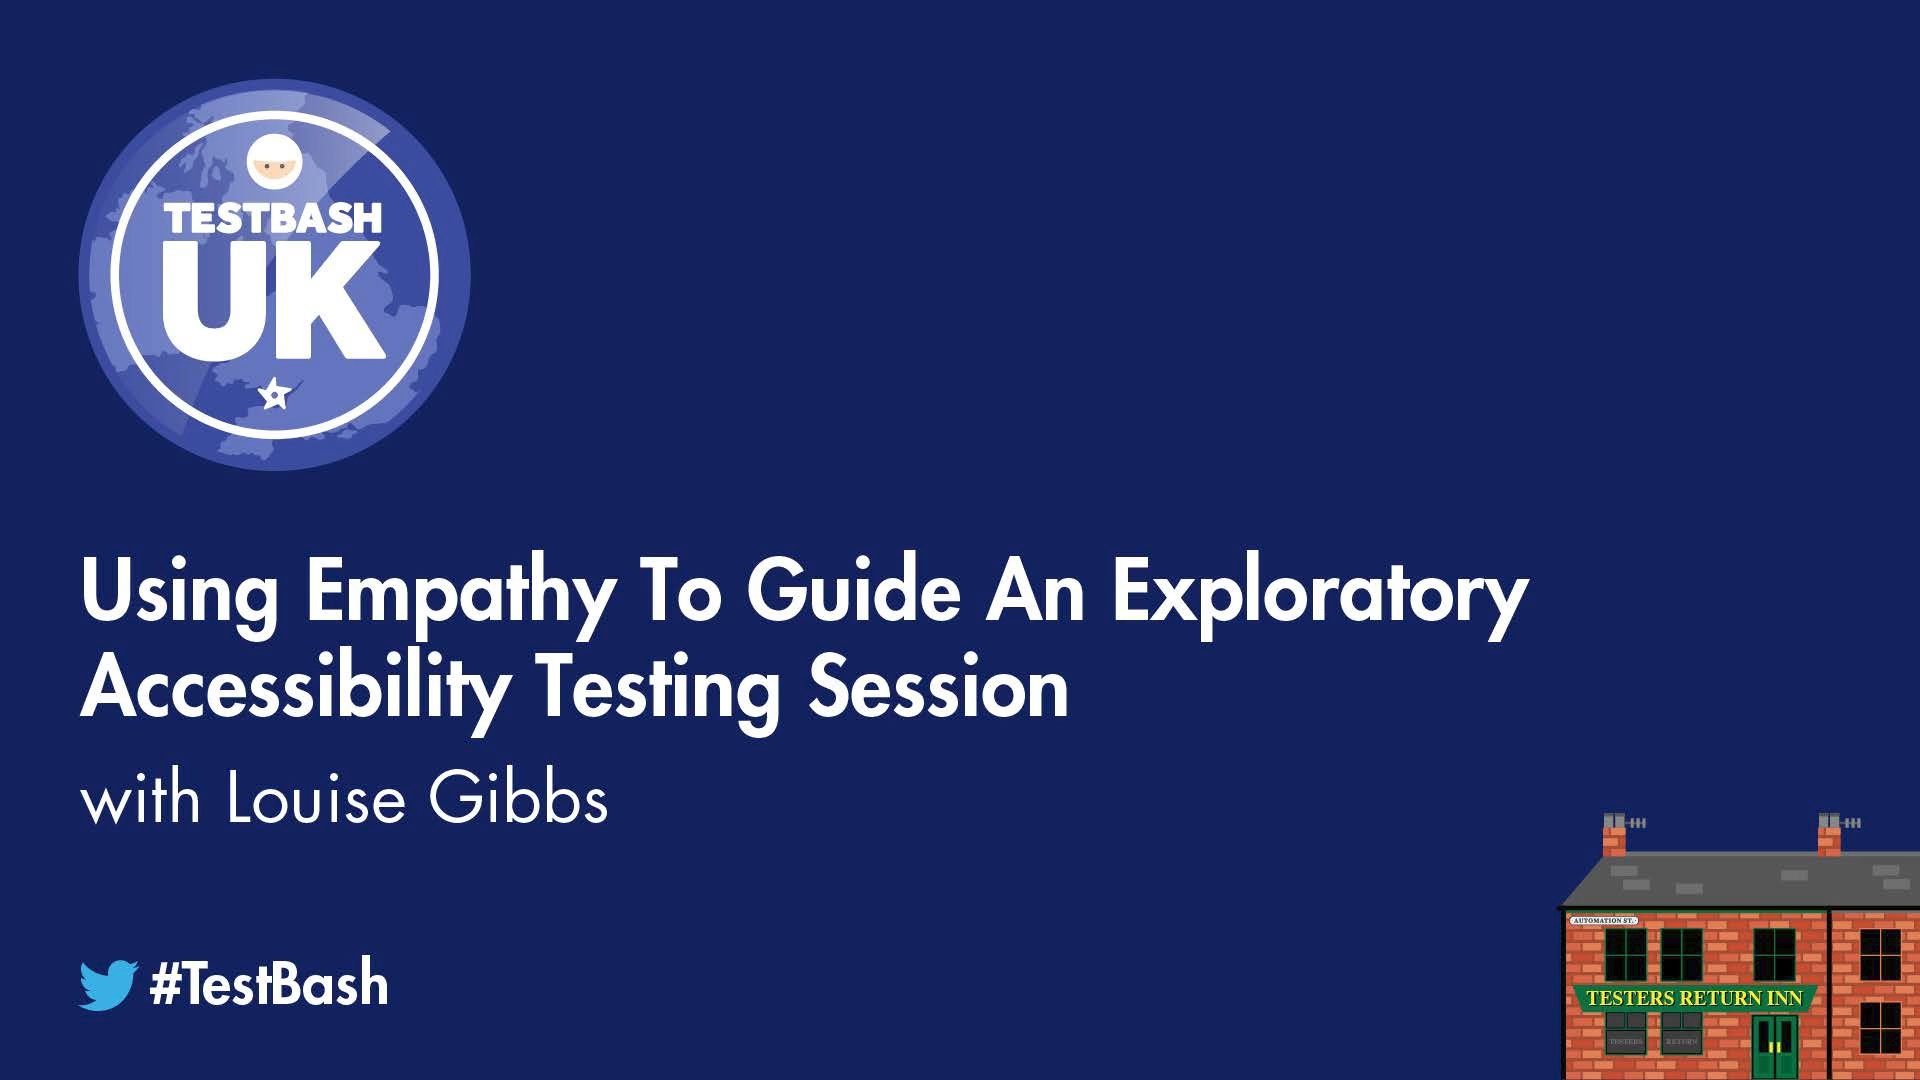 Using Empathy To Guide An Exploratory Accessibility Testing Session